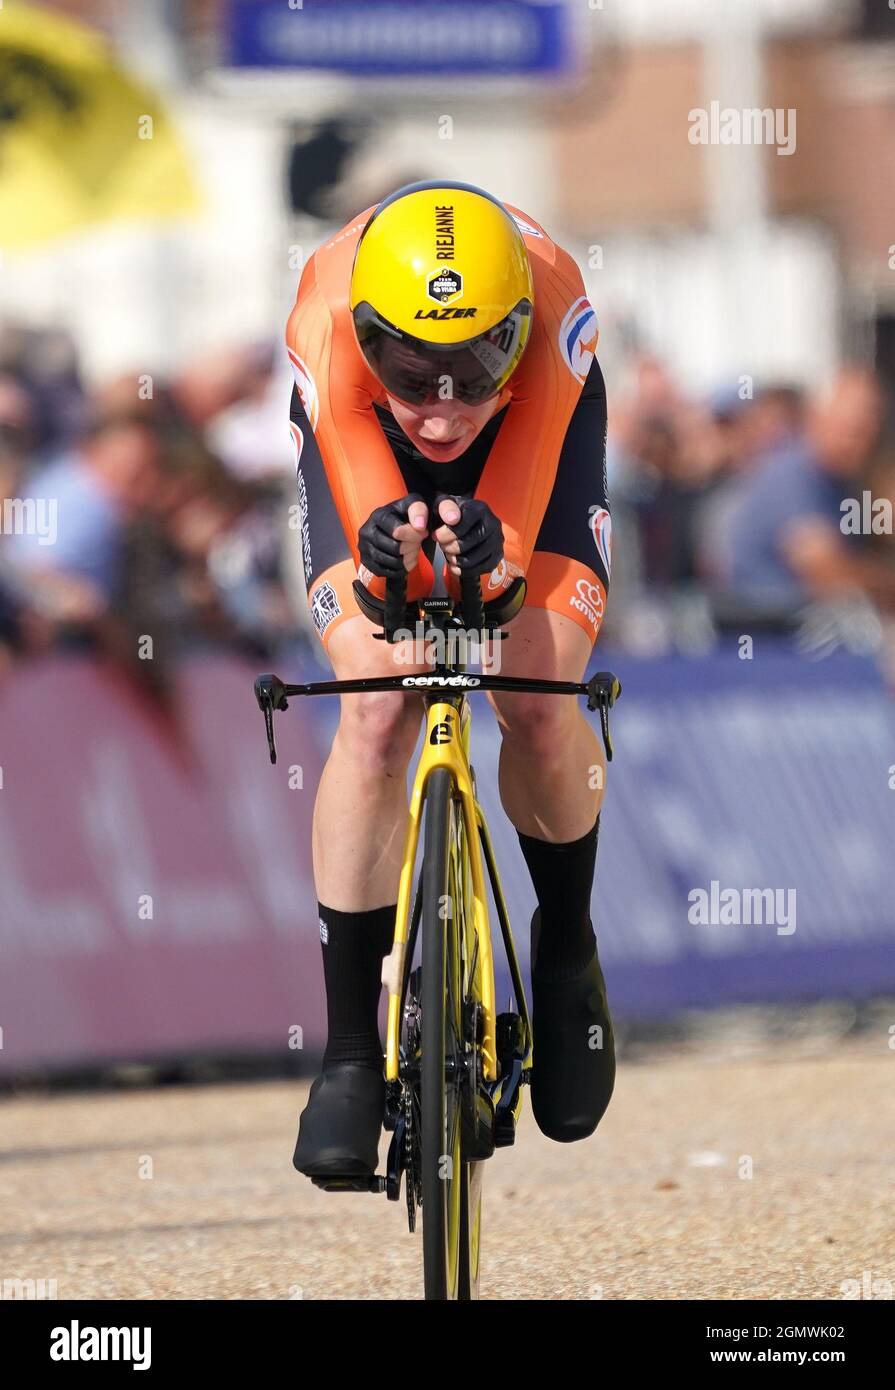 Riejanne Markus (NED) in action during the Women Elite individual time trial race, from Knokke-Heist to Brugge, at the UCI World Championships Road Cycling Flanders 2021 on 20 September 2021 in Brugge, Belgium. Credit: SCS/Soenar Chamid/AFLO/Alamy Live News Stock Photo